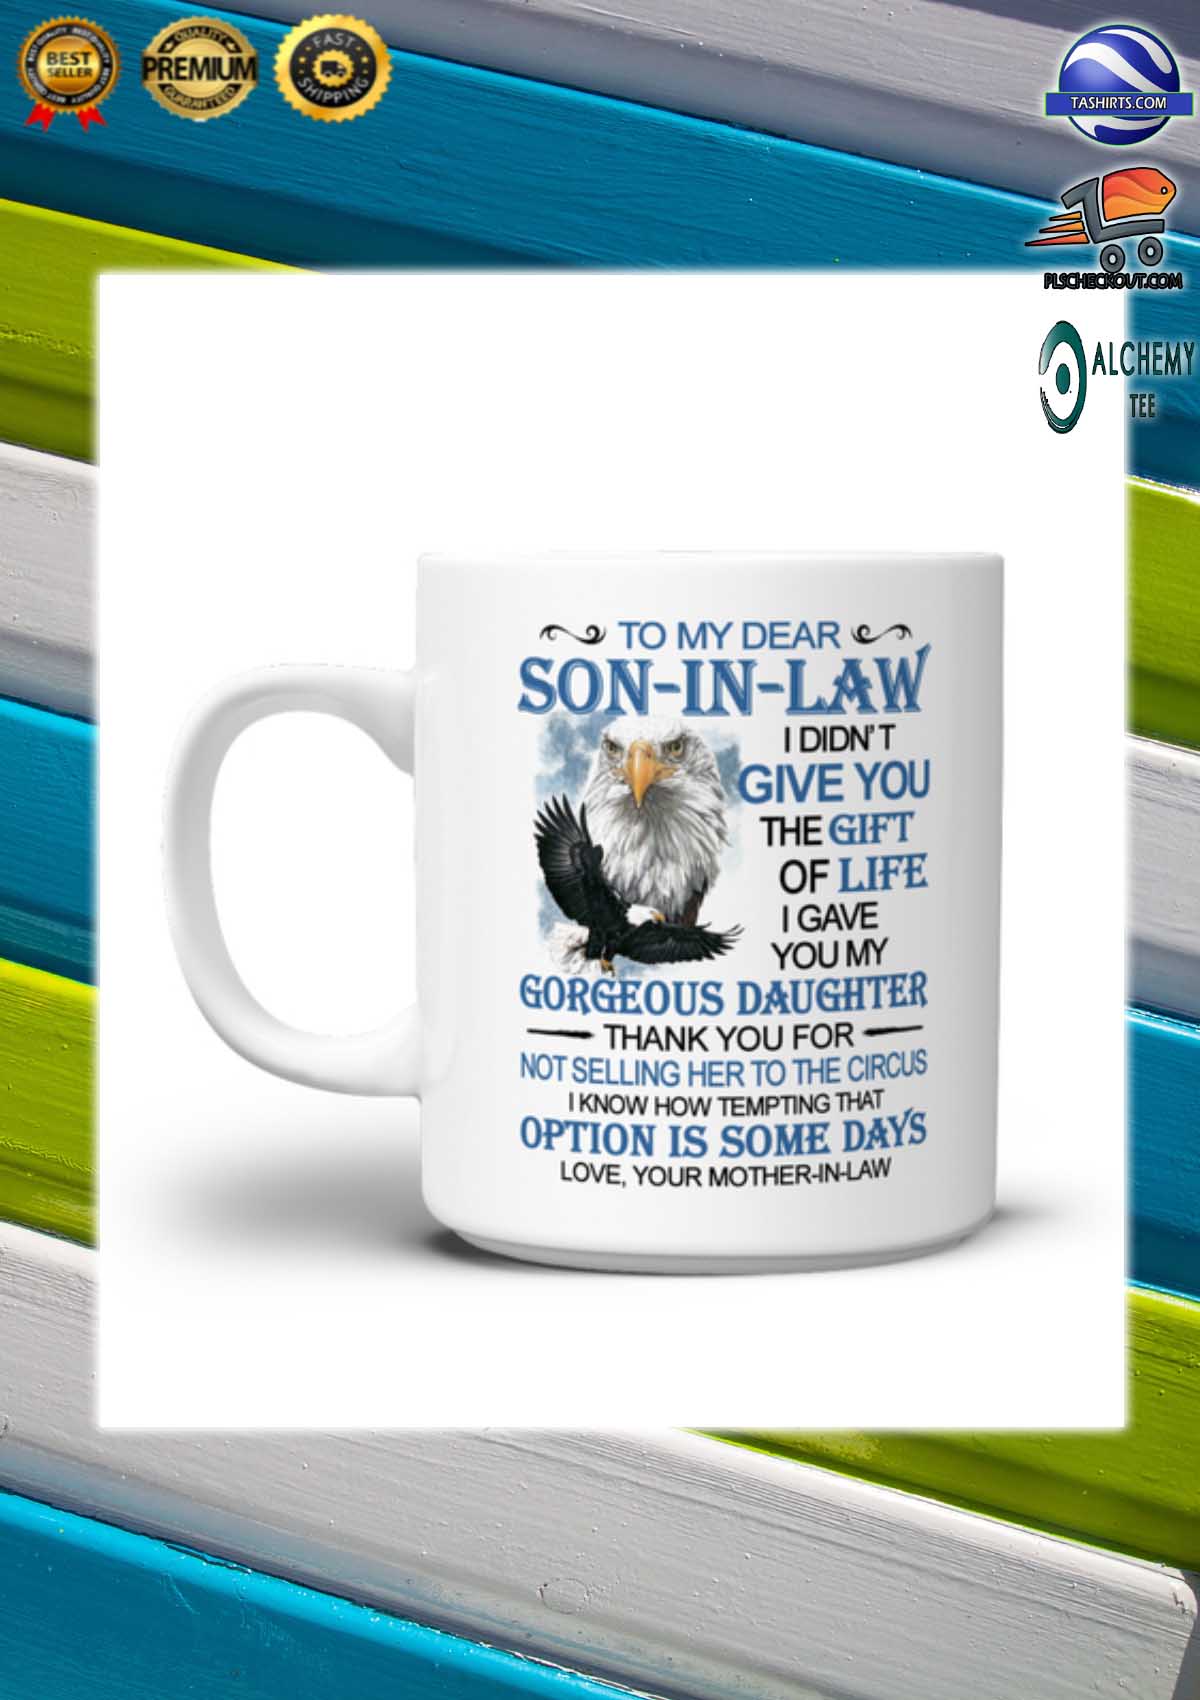 Eagle to my dear son-in-law love your mother-in-law mug